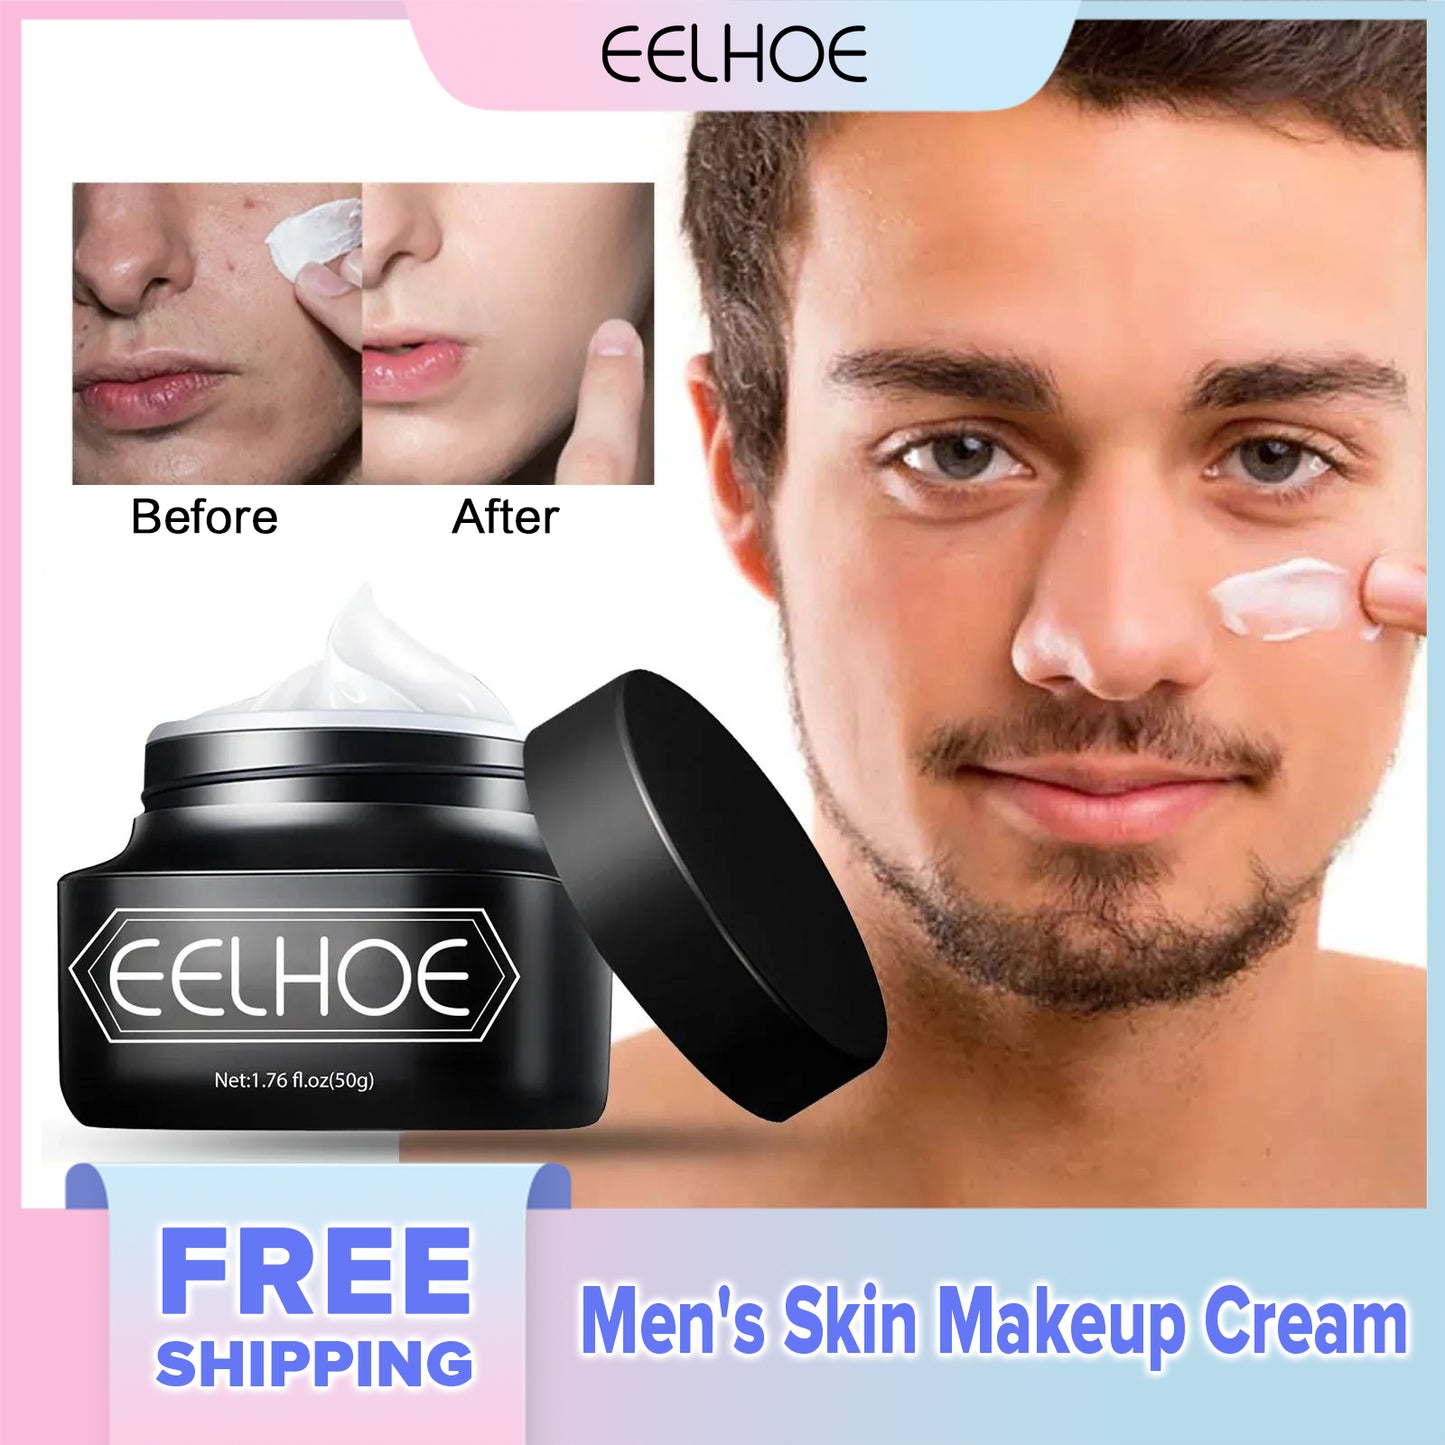 EELHOE Men's Skin Makeup Cream Refreshing And Non Greasy Concealer Acne Mask Skin Brightening Invisible Pore Sloth Cream（50g)